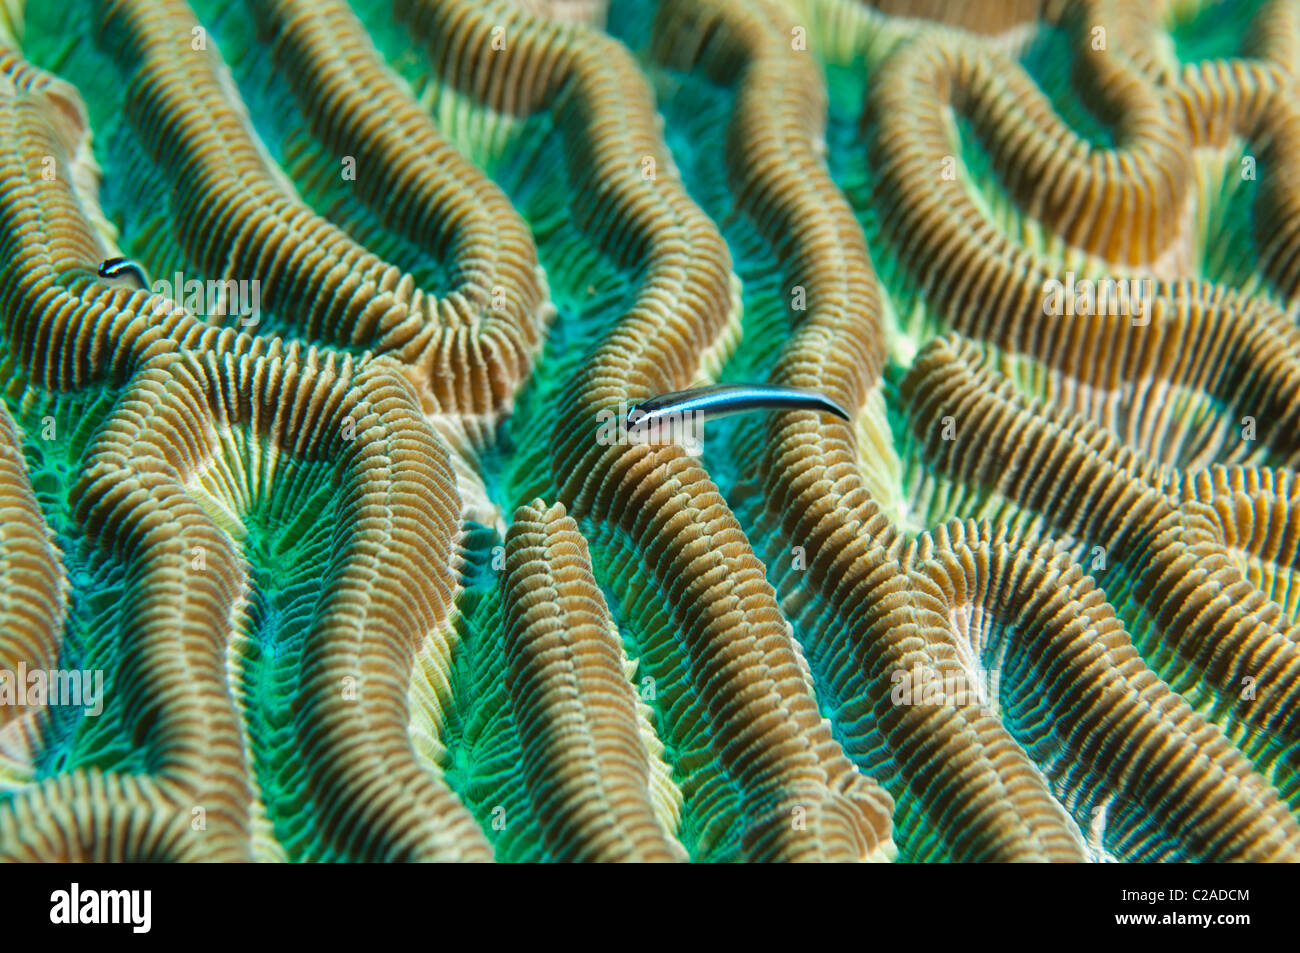 Neon Gobi fish can almost always be found perching on brain coral. Stock Photo